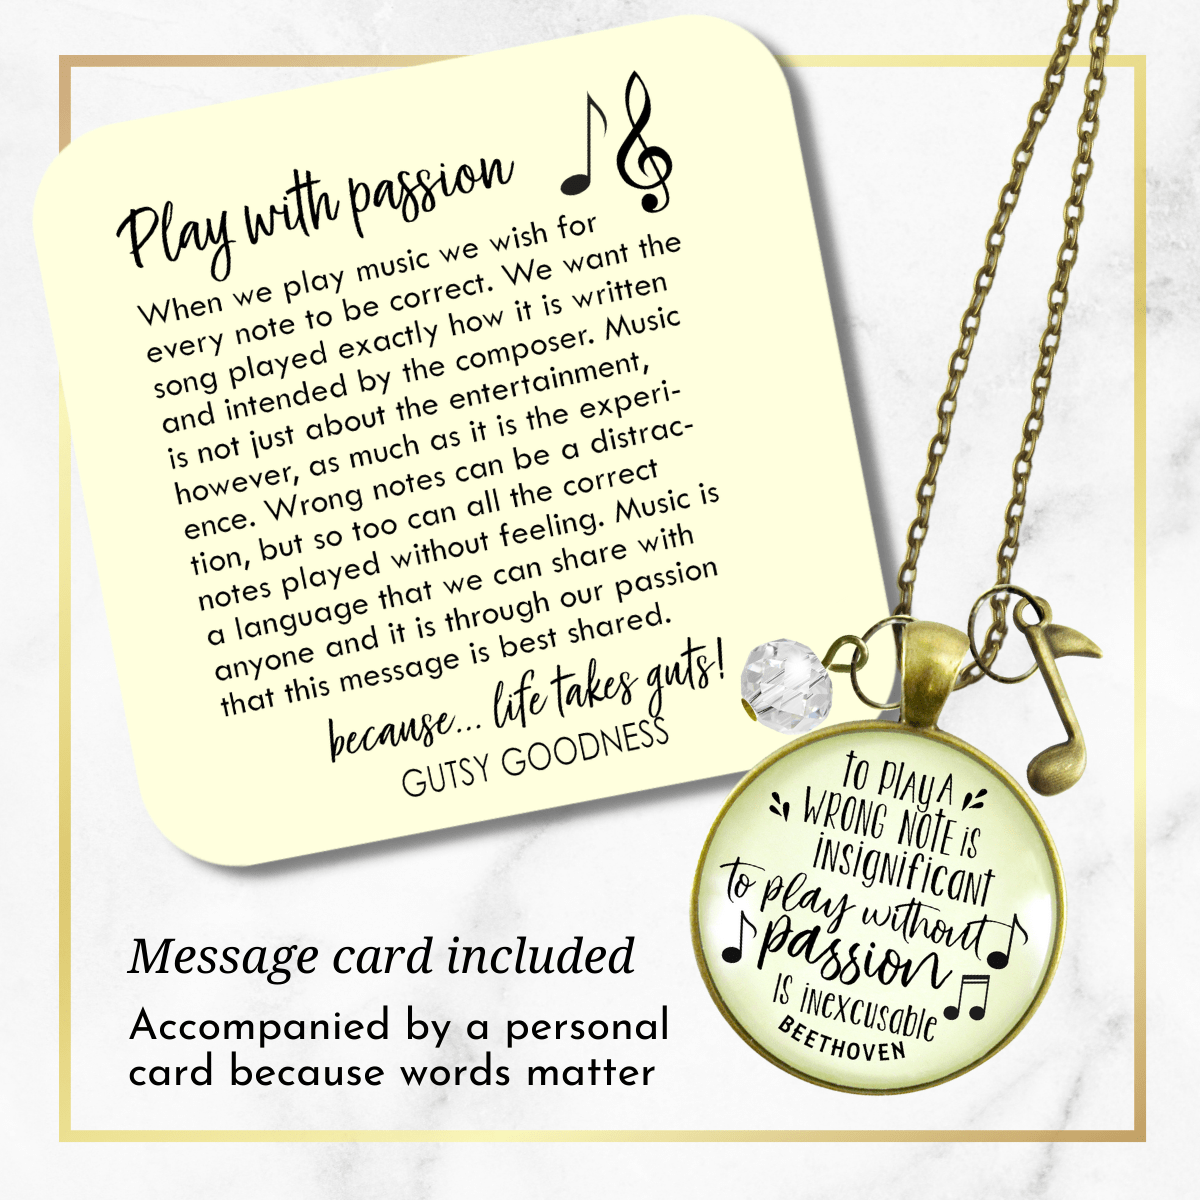 Gutsy Goodness Music Note Necklace To Play Wrong Note Beethoven Quote Teacher Gift - Gutsy Goodness Handmade Jewelry;Music Note Necklace To Play Wrong Note Beethoven Quote Teacher Gift - Gutsy Goodness Handmade Jewelry Gifts